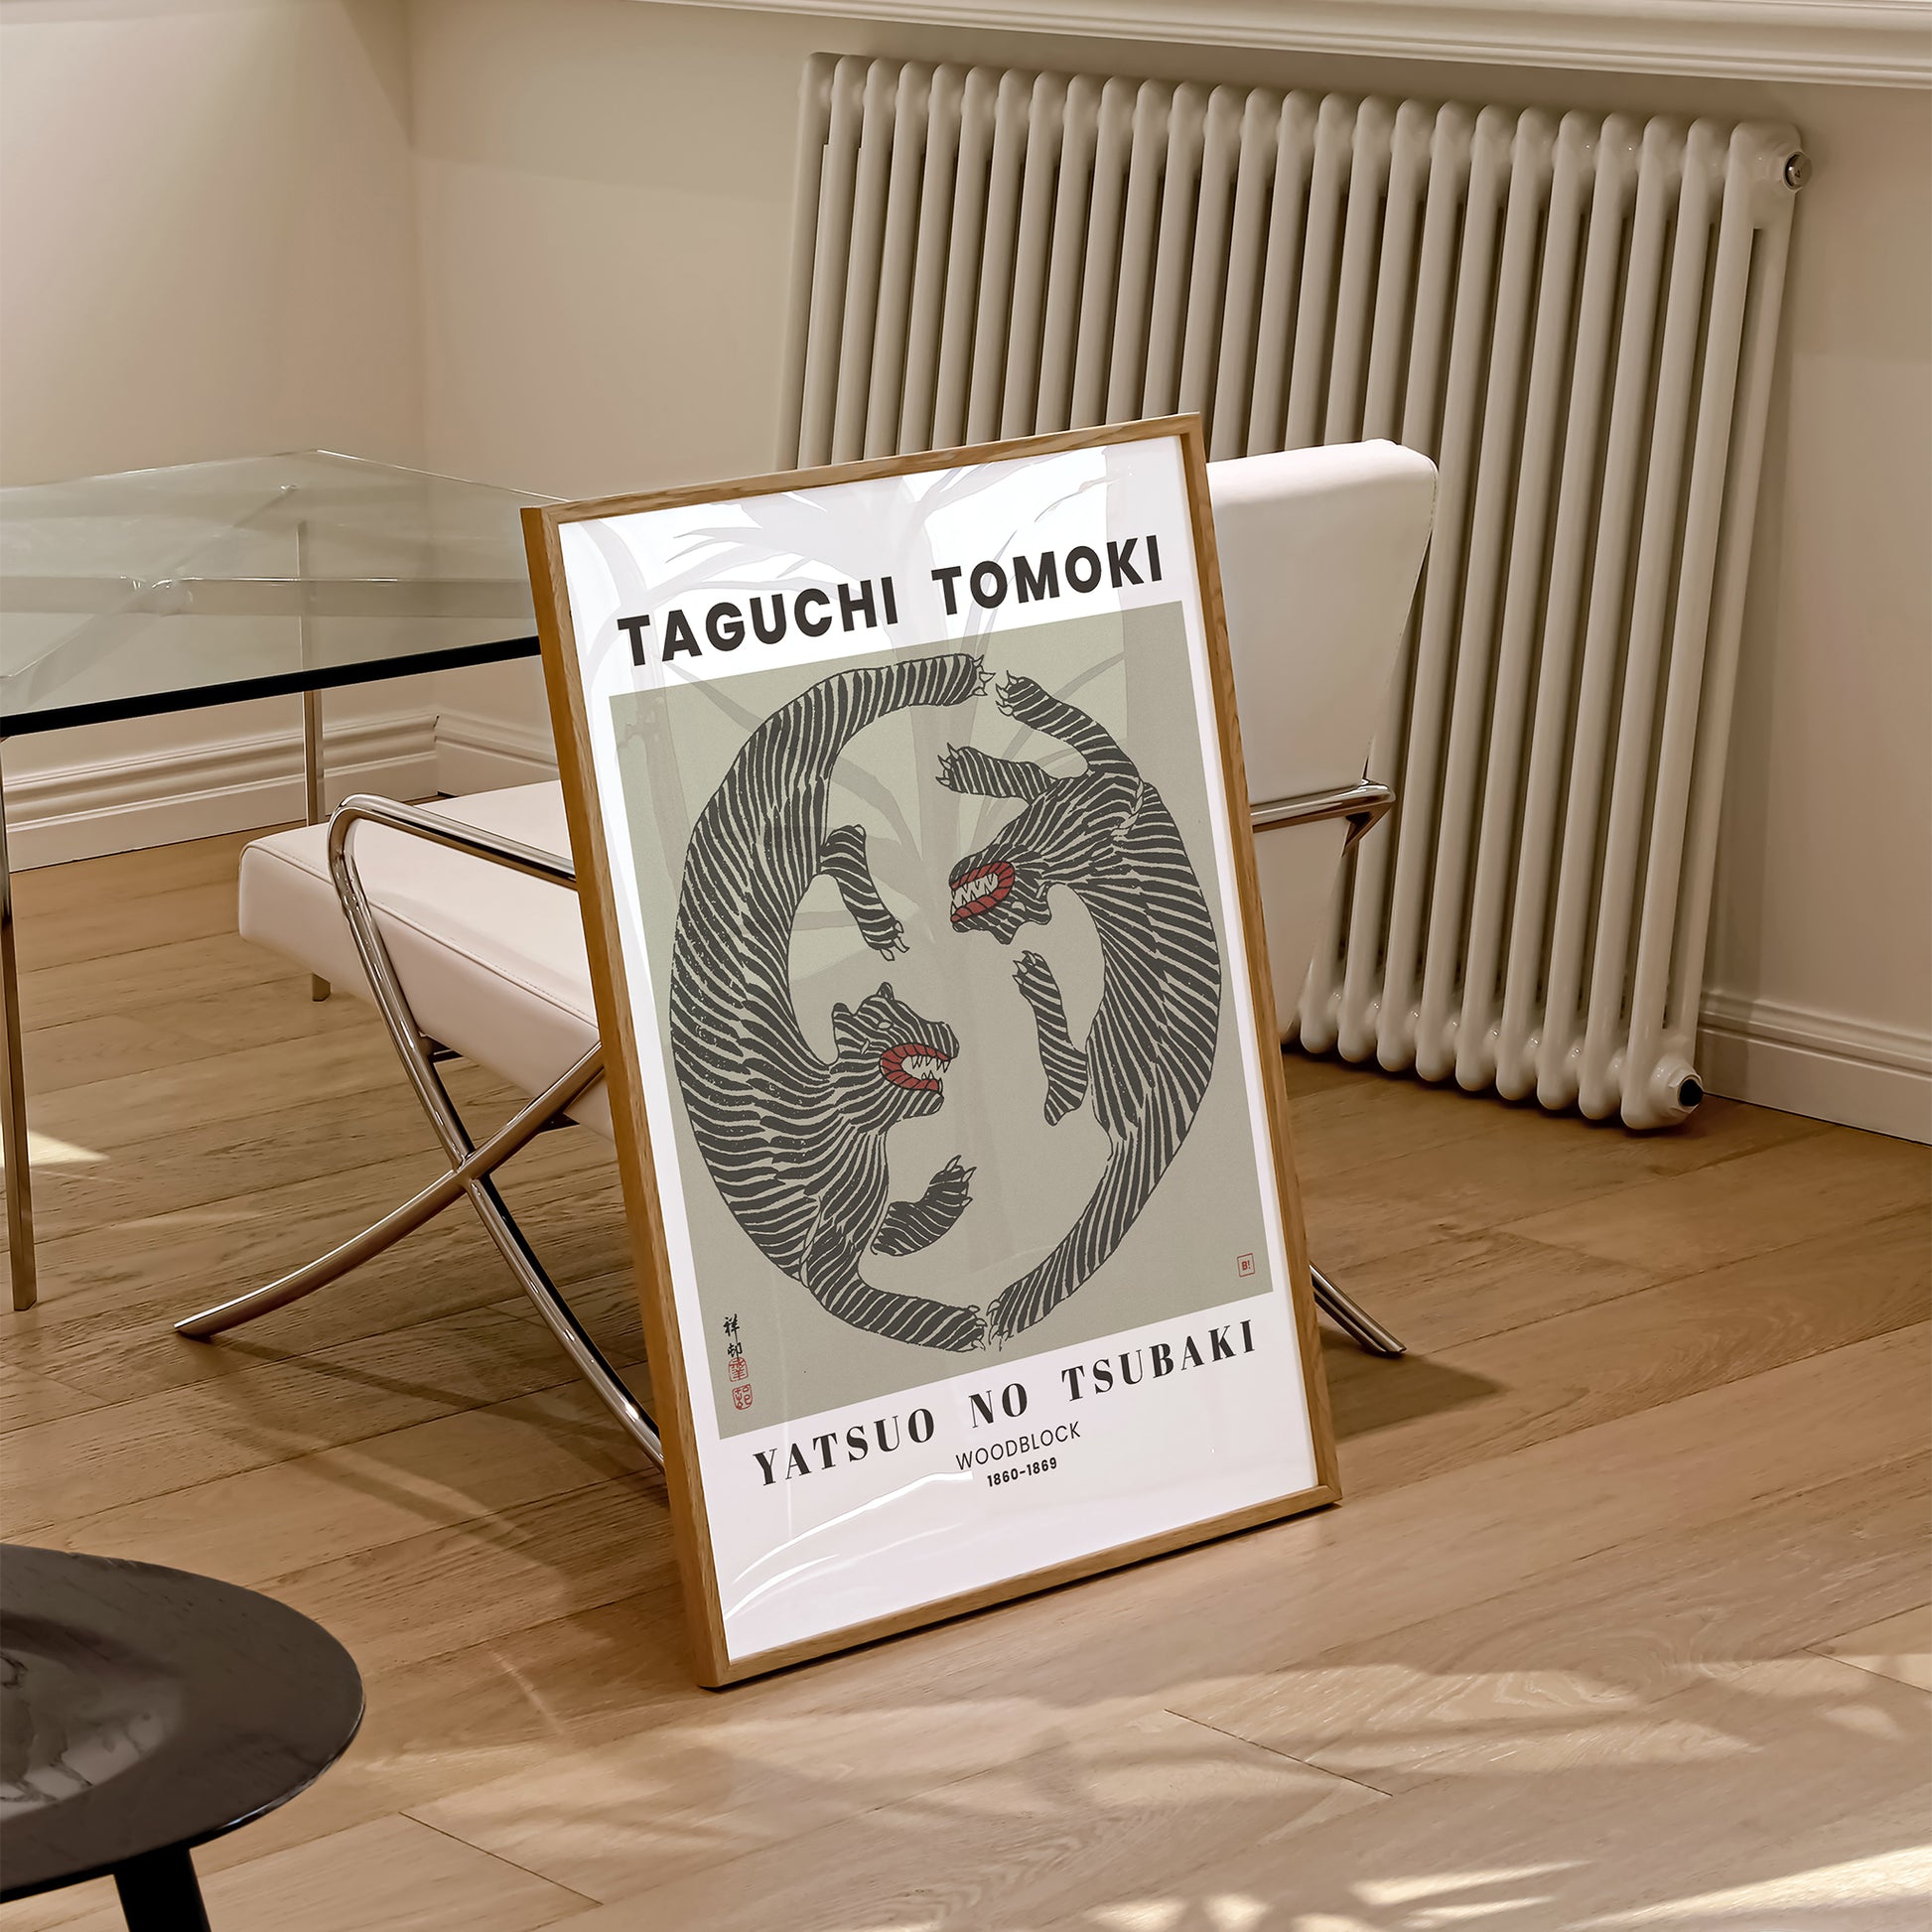 Be inspired by our remastered Taguchi Tomoki Woodblock Tigers Sage Green exhibition art print. This artwork was printed using the giclée process on archival acid-free paper and is presented in a natural oak frame that captures its timeless beauty in every detail.